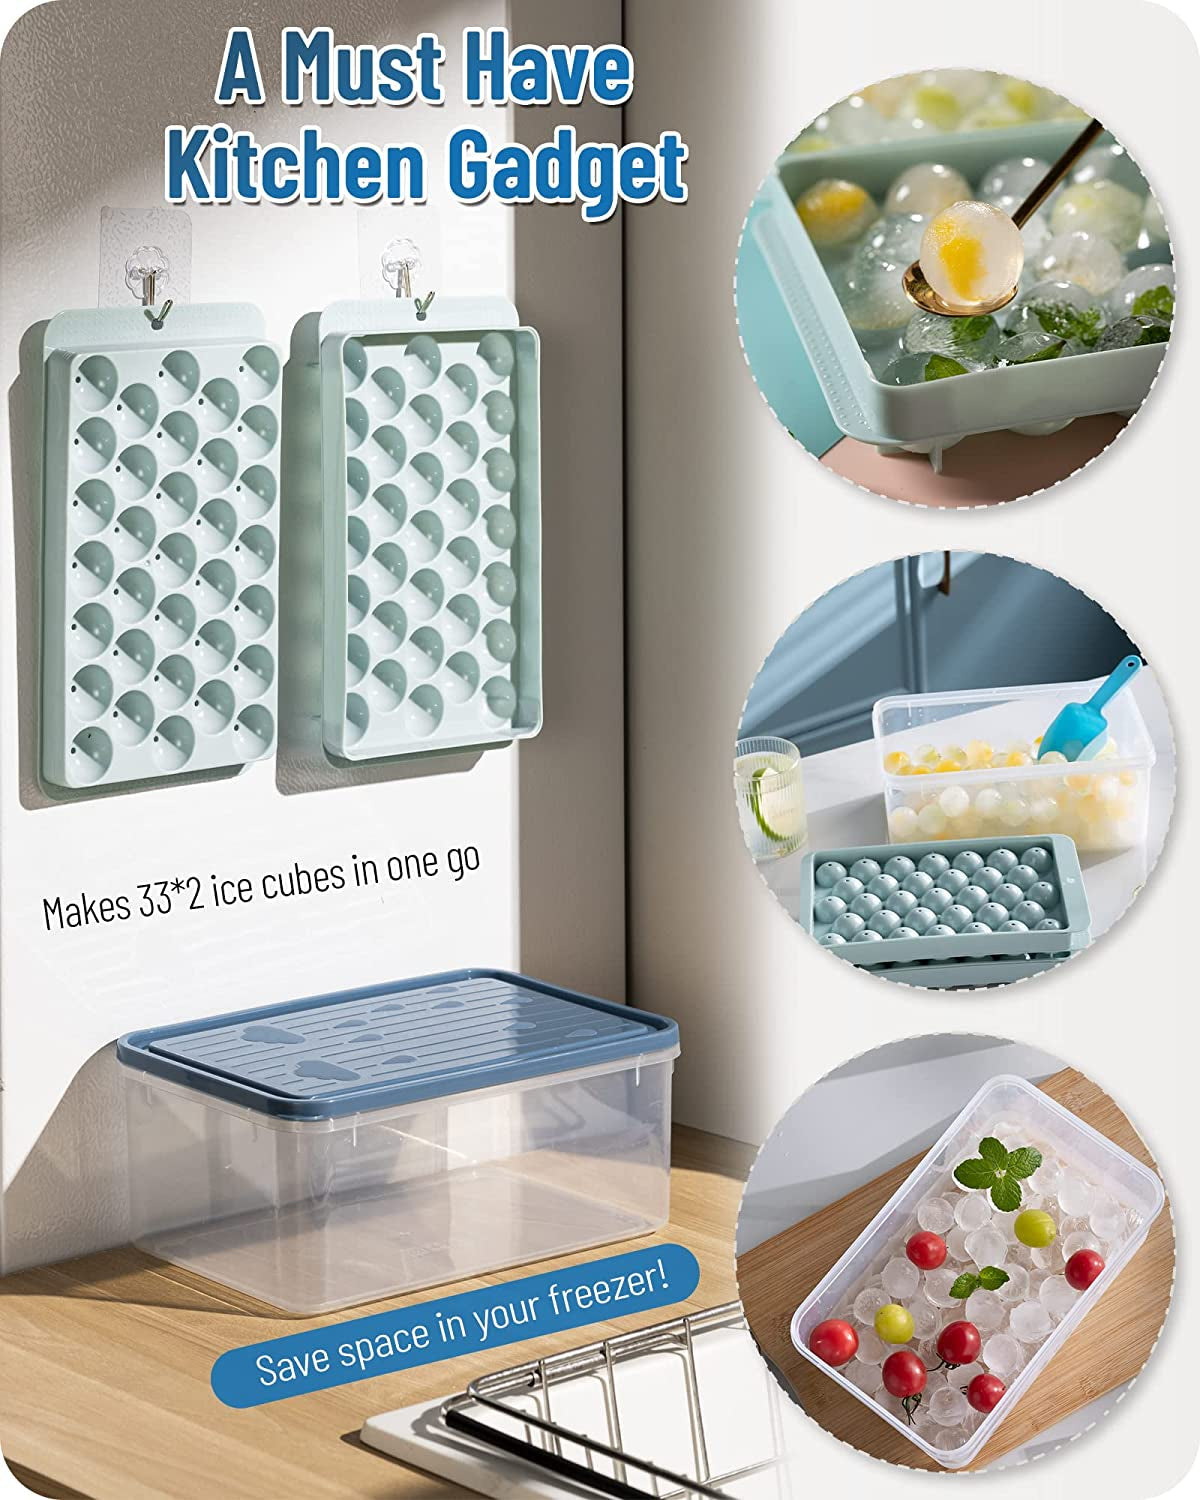 Round Ice Cubes Trays, Round Ice Trays for Freezer with Lid, Ice Buckets Tongs & Scoop